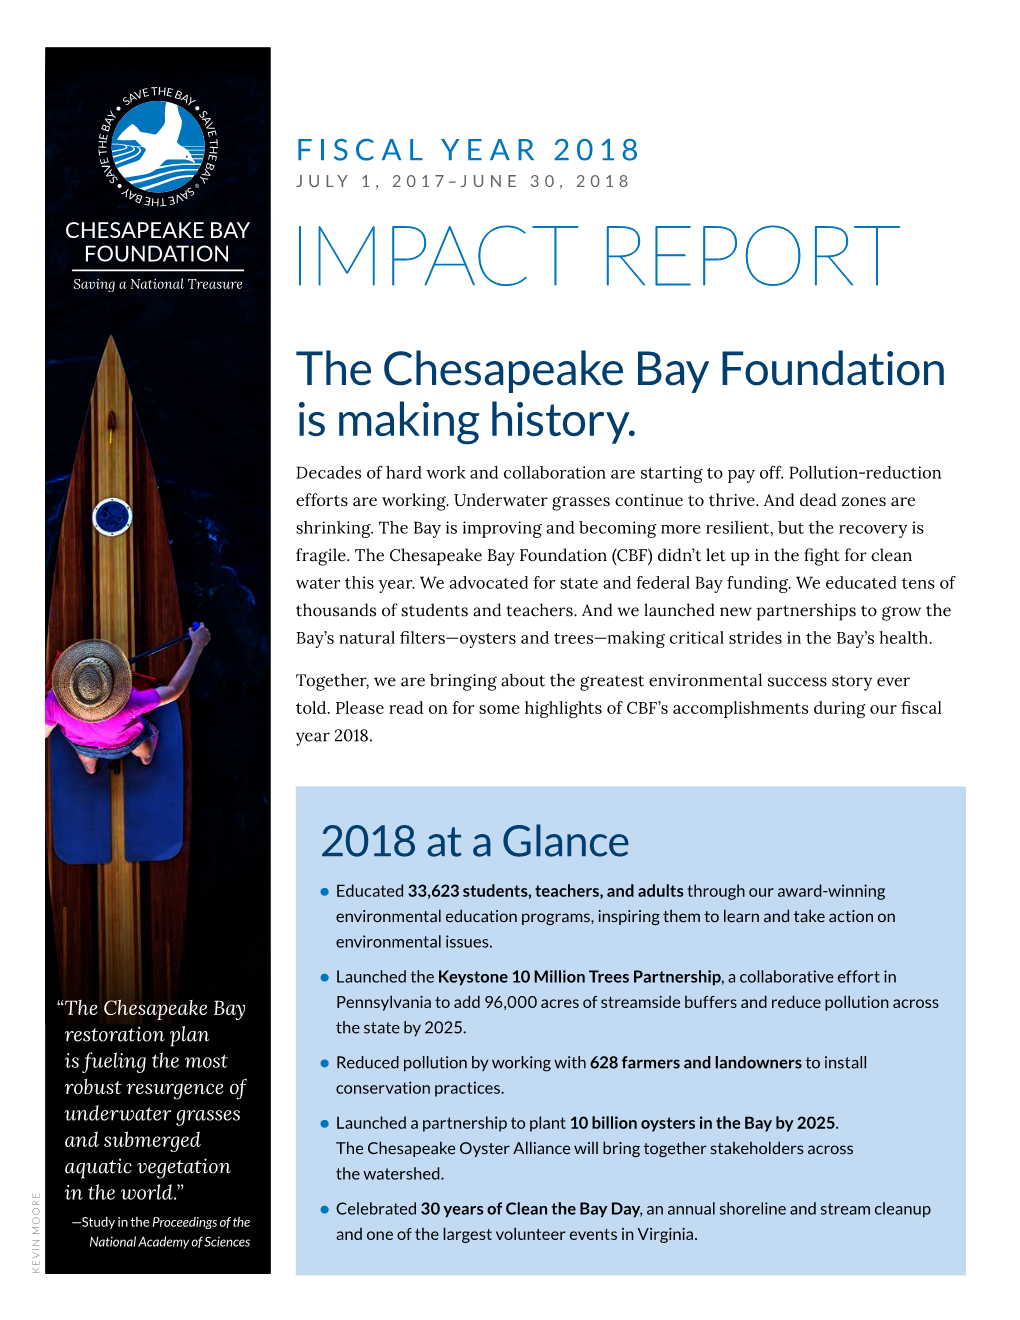 2018 IMPACT REPORT the Chesapeake Bay Foundation Is Making History